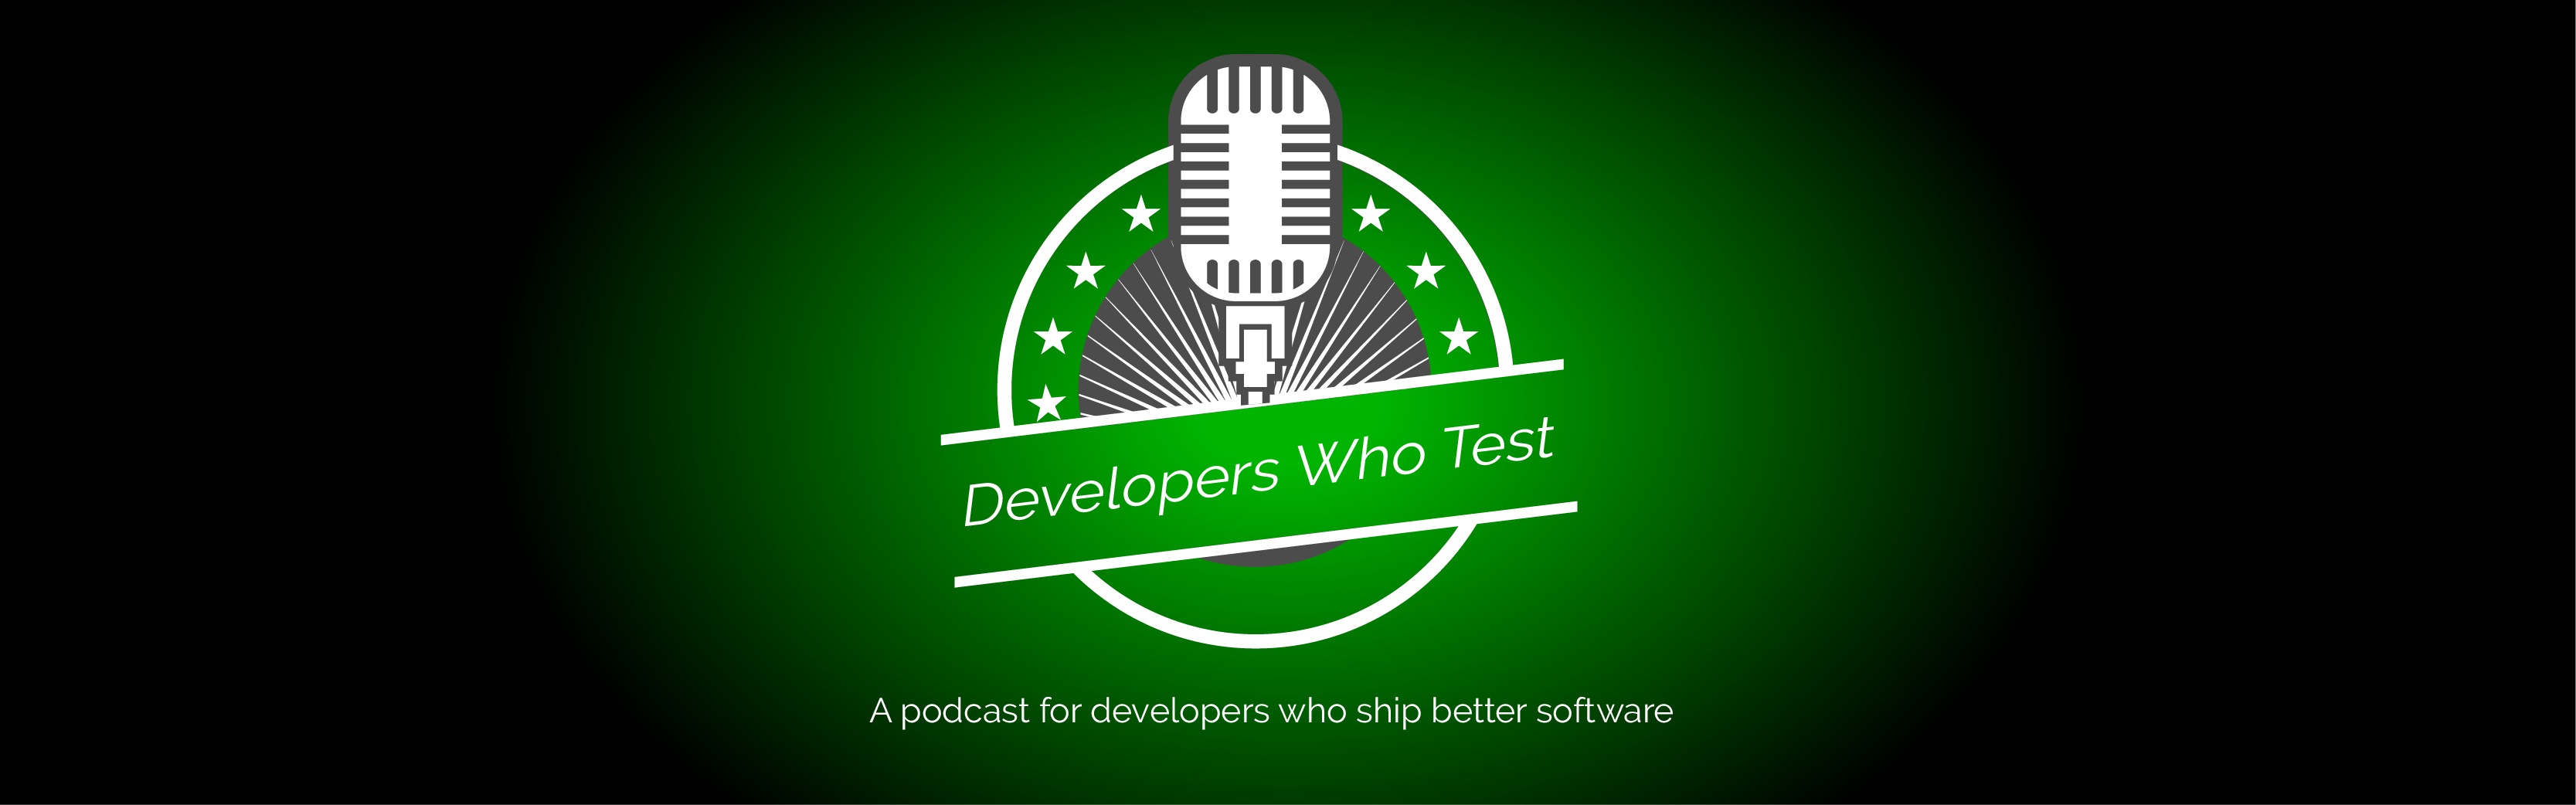 Developers Who Test Podcast